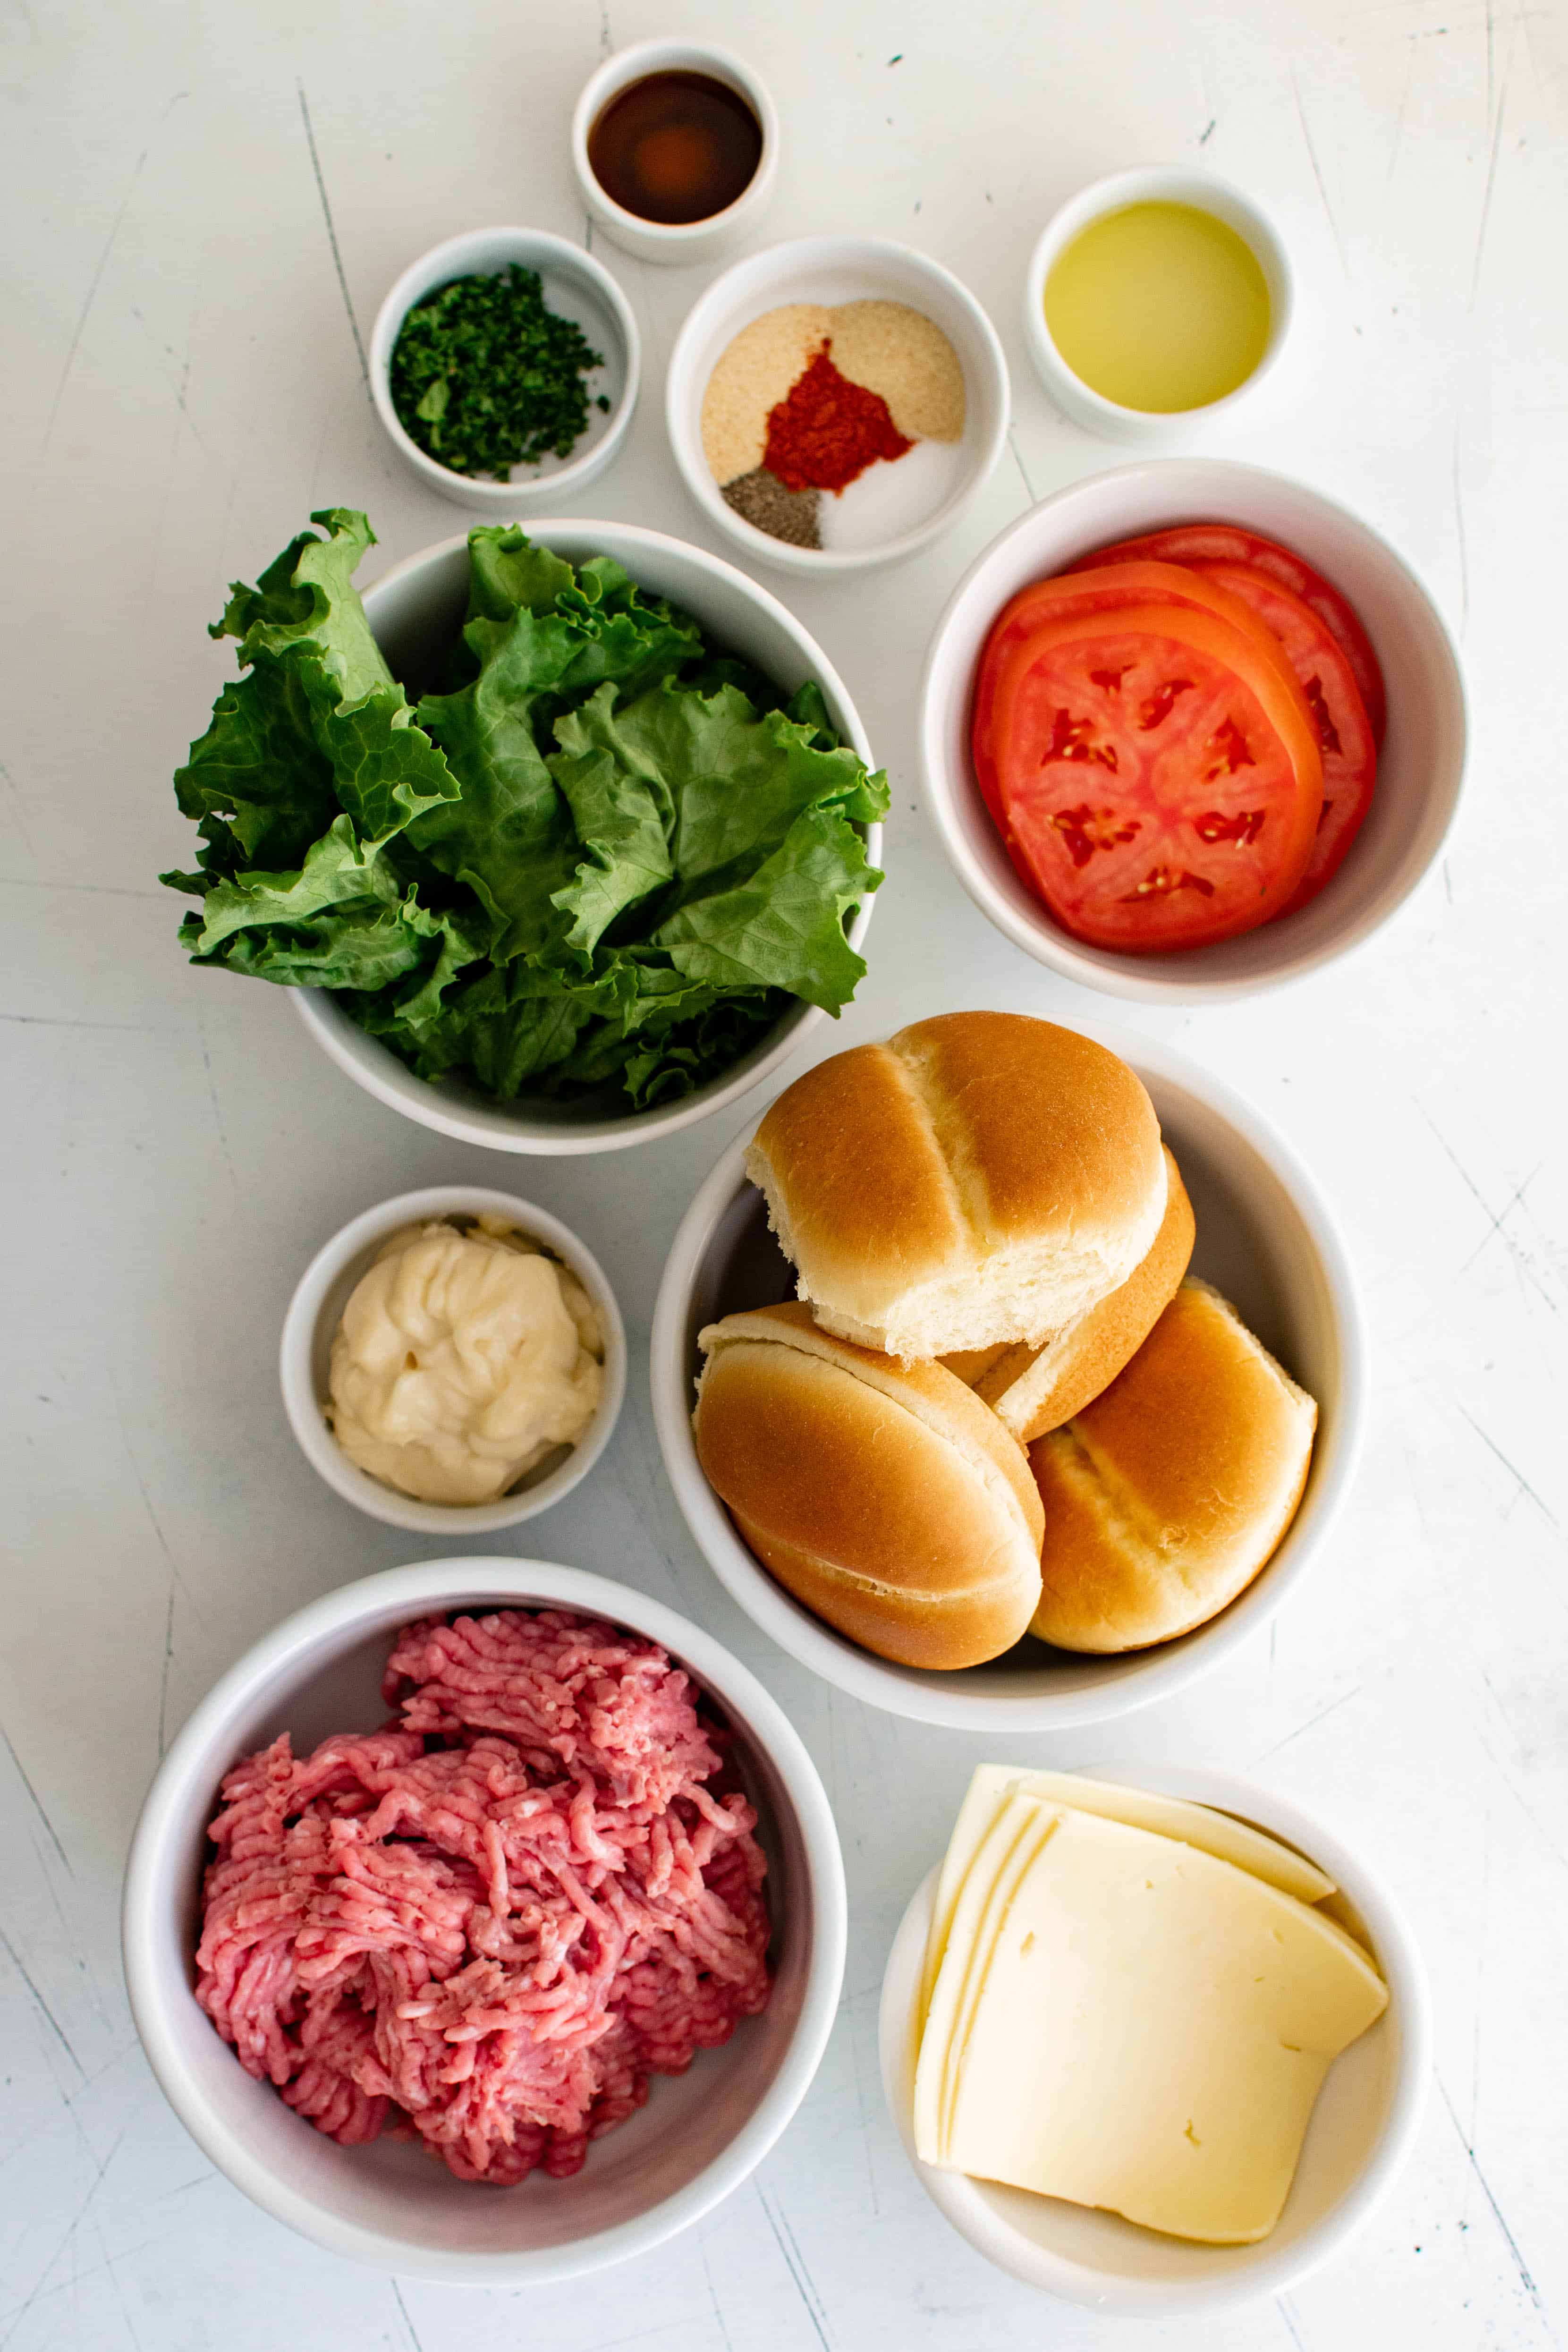 All of the ingredients needed to make homemade ground turkey patties.